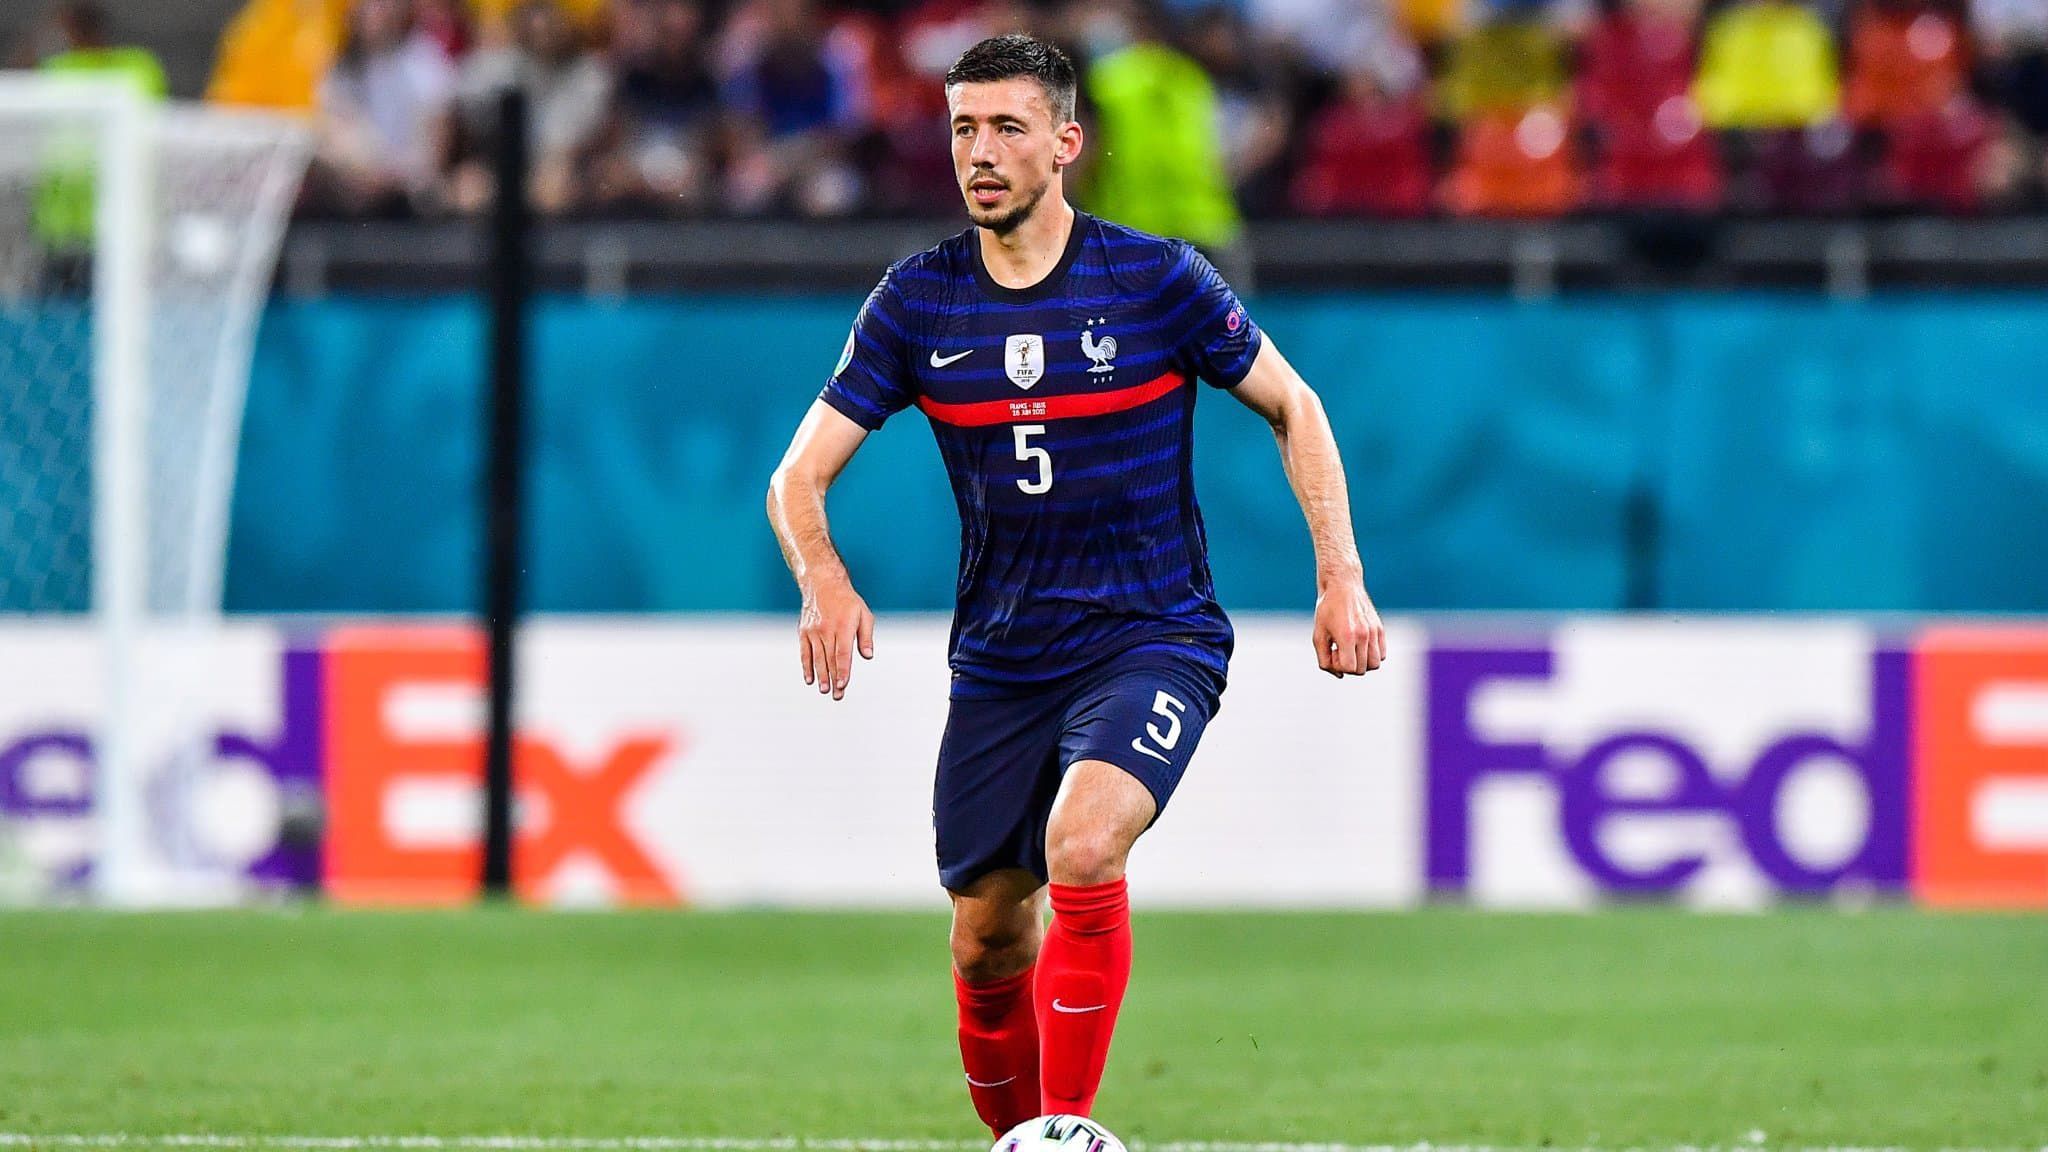 Rami would have “spent time” with Lenglet before 8th against Switzerland